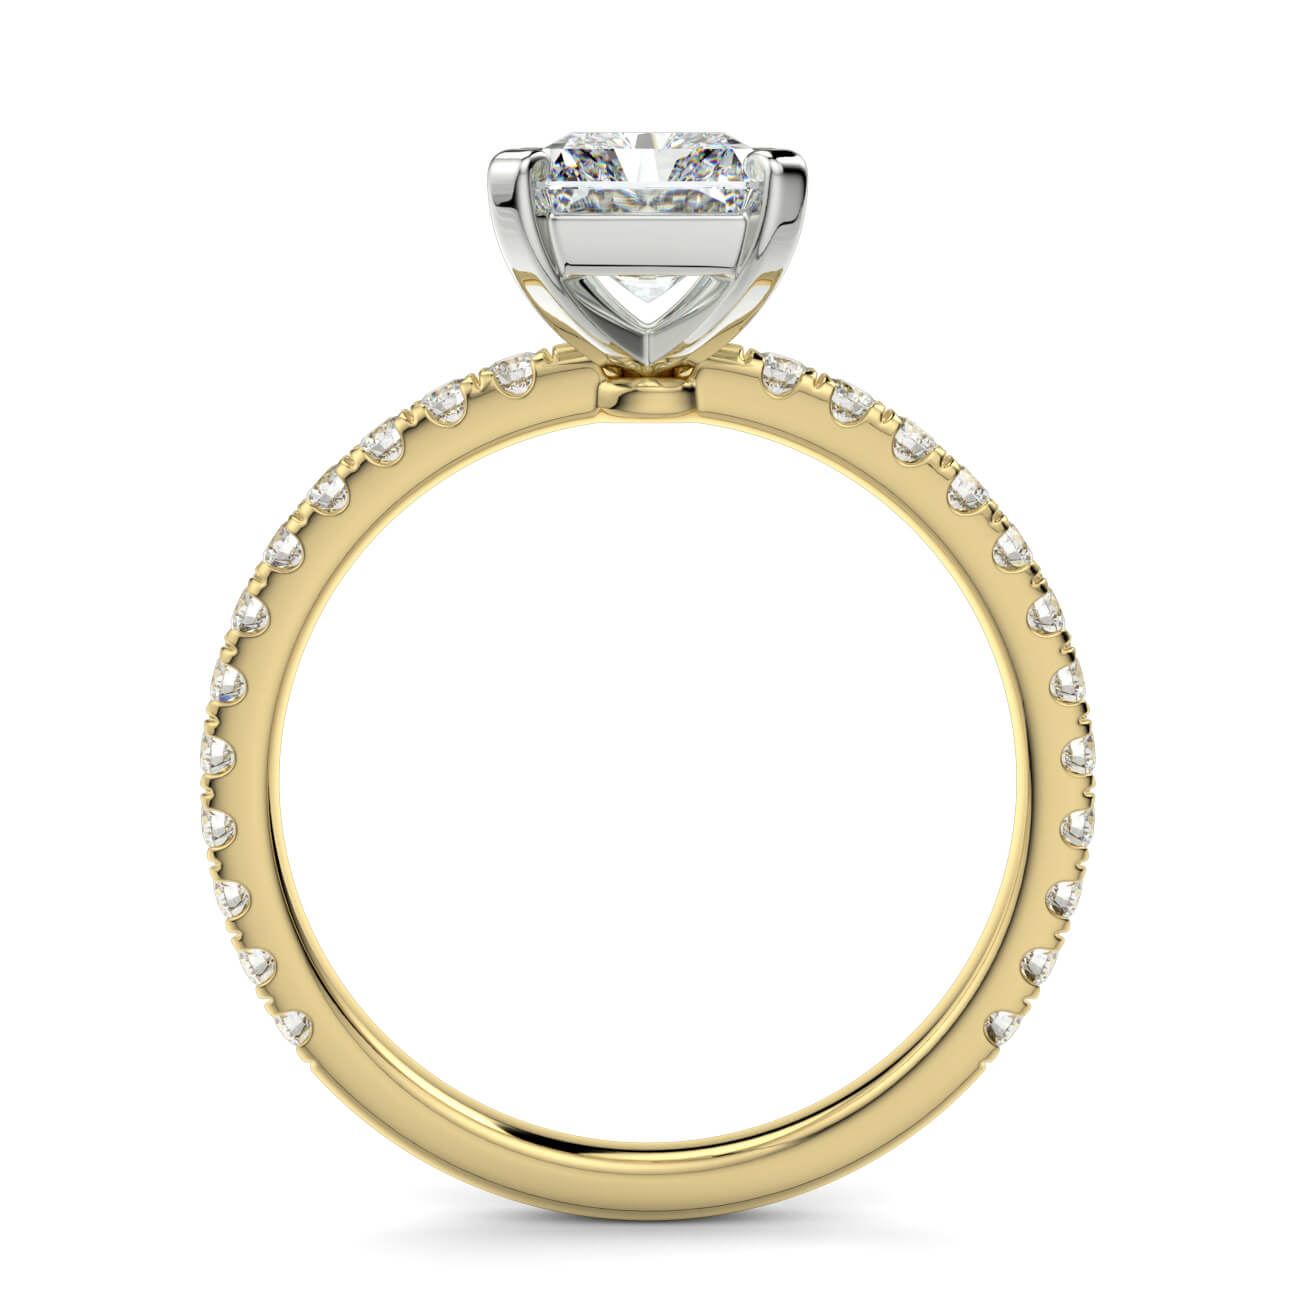 Delicate ‘Liat’ Radiant Cut Diamond Engagement Ring in 18k Yellow and White Gold – Australian Diamond Network